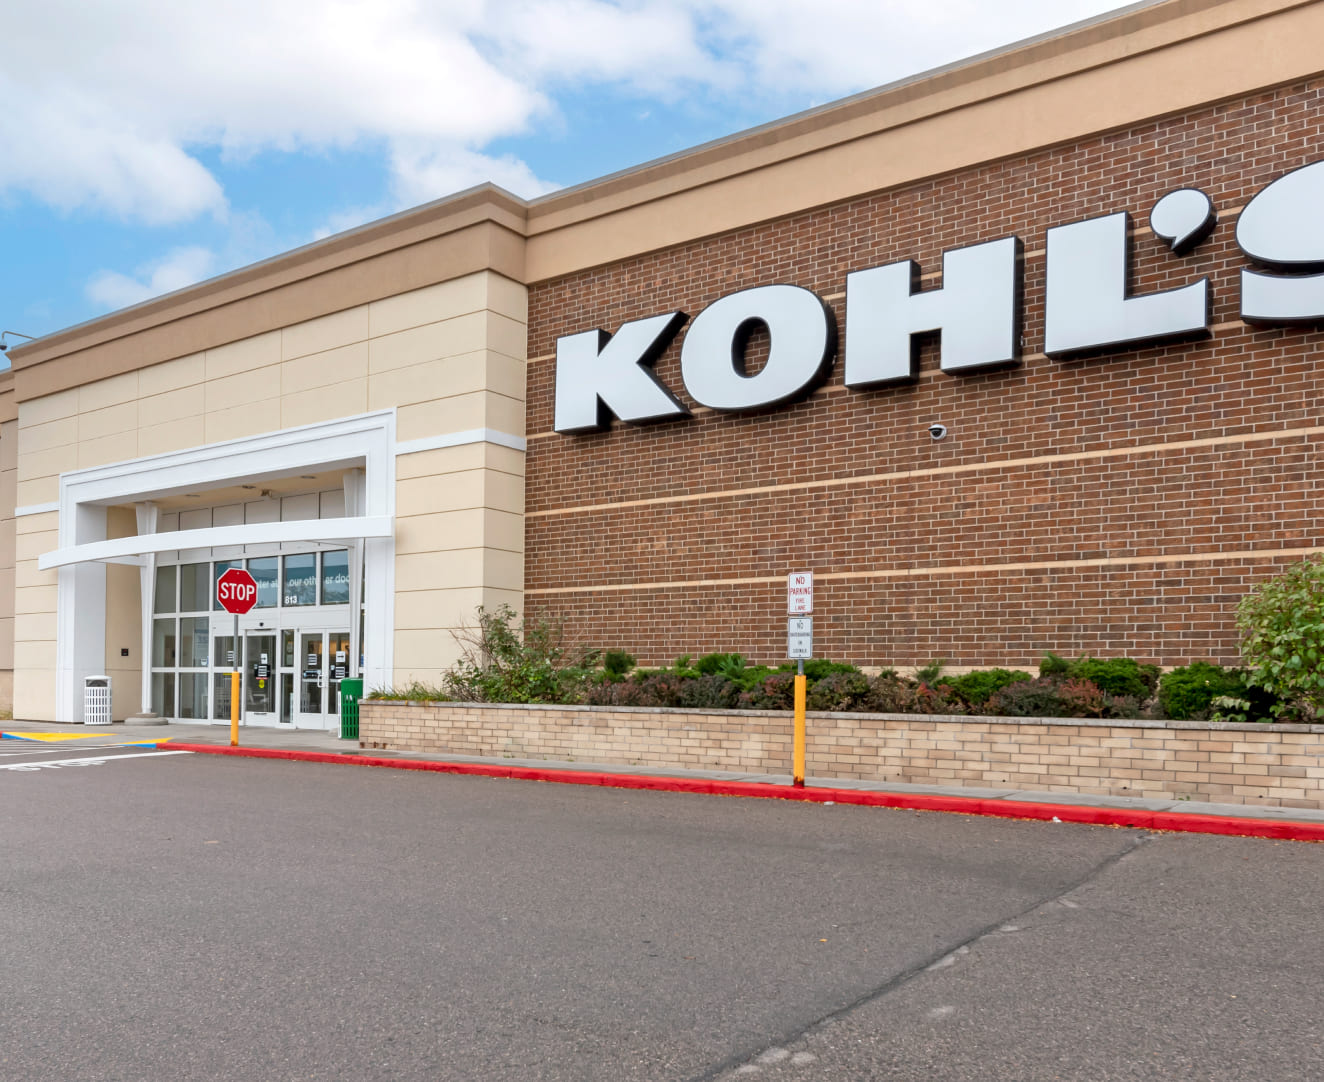 The exterior entrance to Kohl's at 813-831 Harmony Road in Fort Collins, CO.